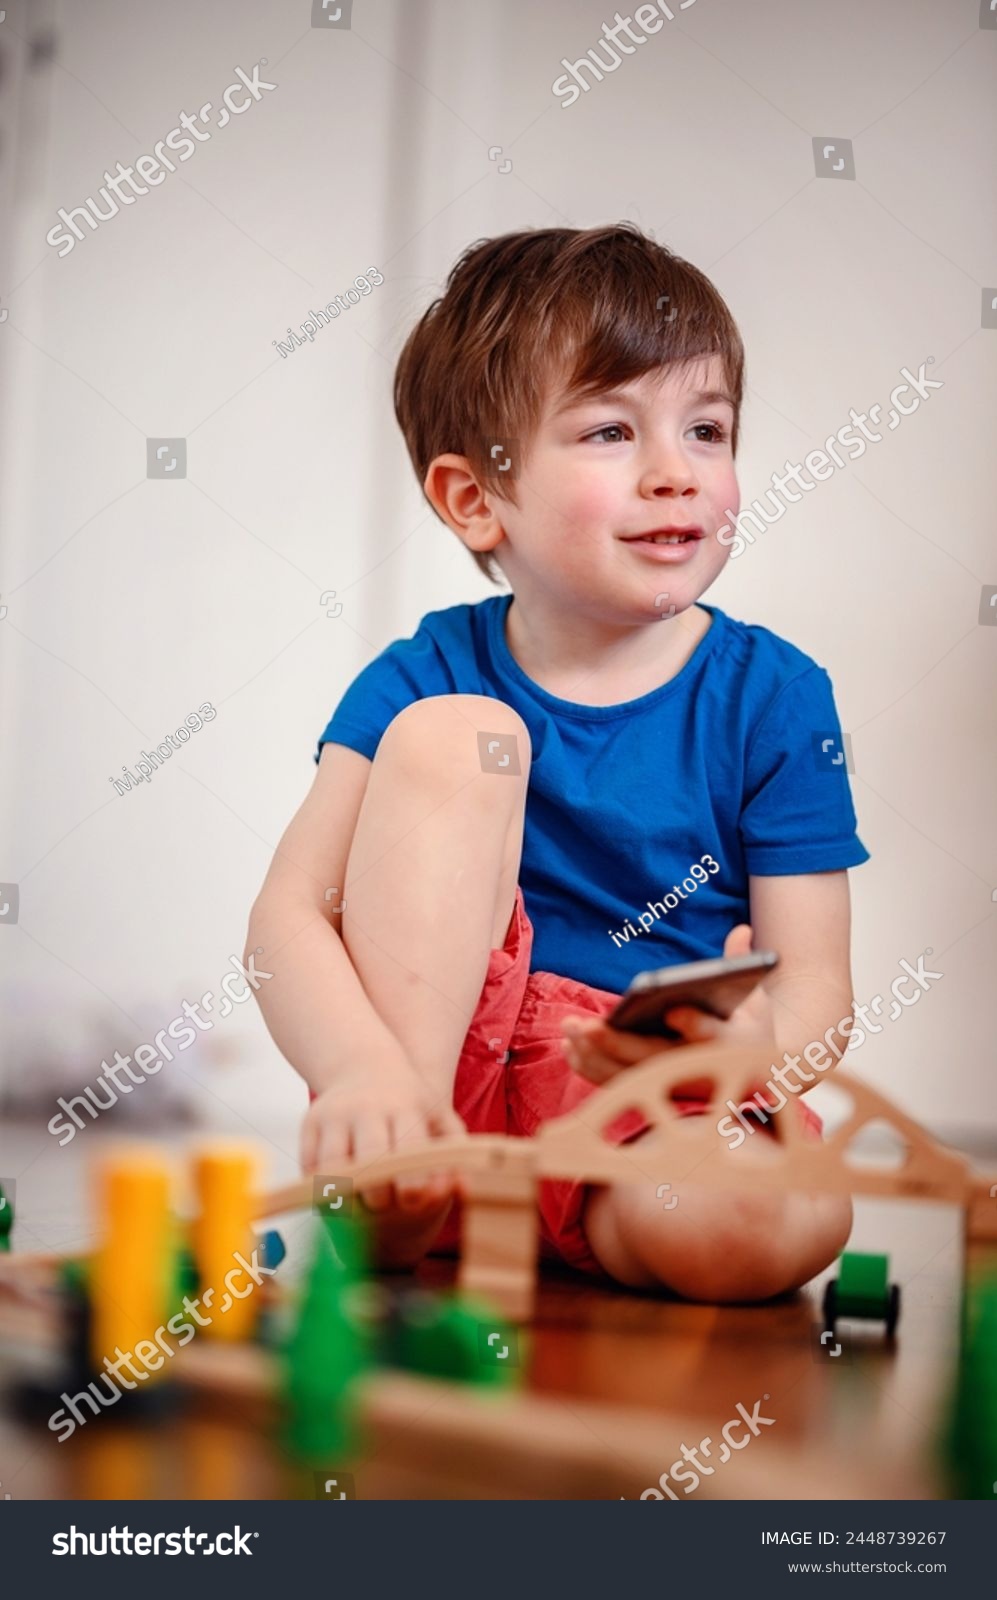 A joyful young boy with a smartphone sits amidst a wooden train setup, his bright laughter echoing the playful fusion of digital and tangible play #2448739267